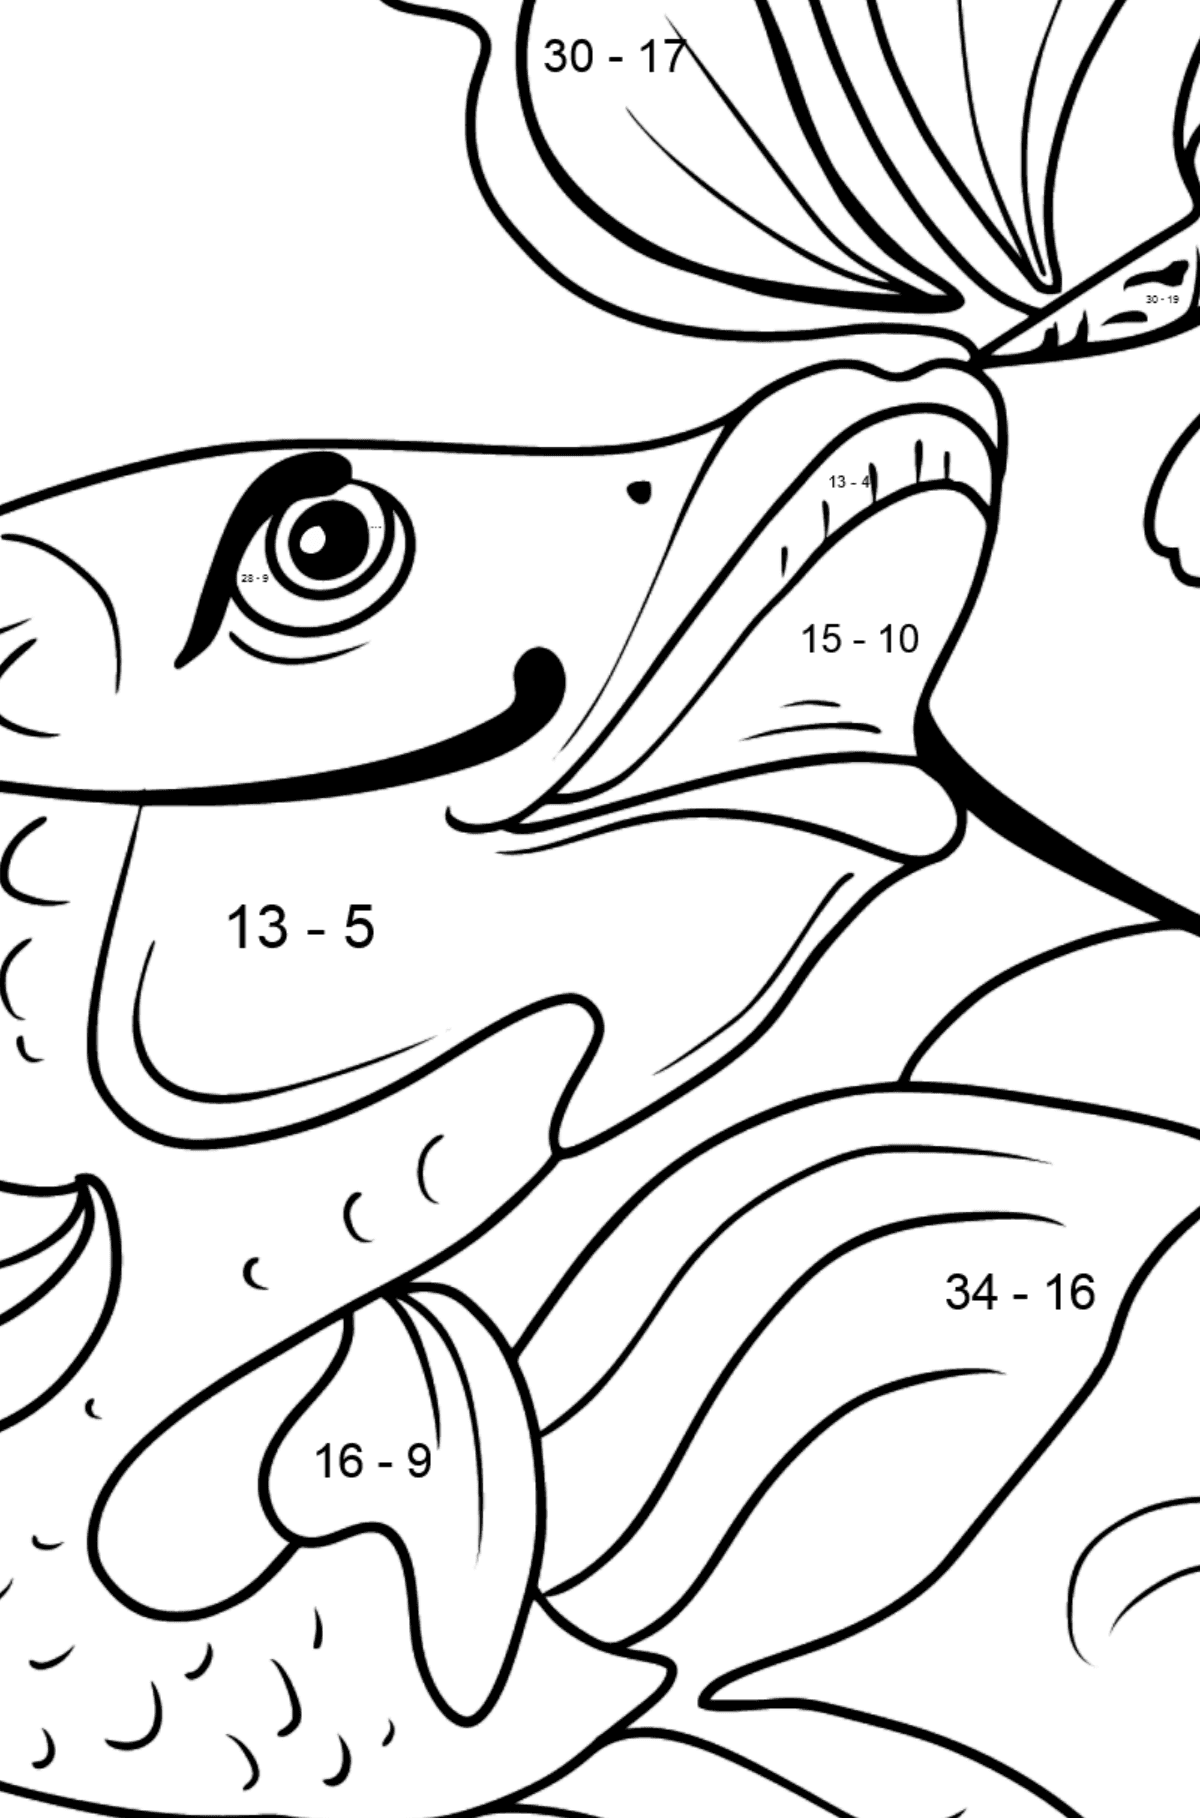 Fish and Butterfly coloring page - Math Coloring - Subtraction for Kids